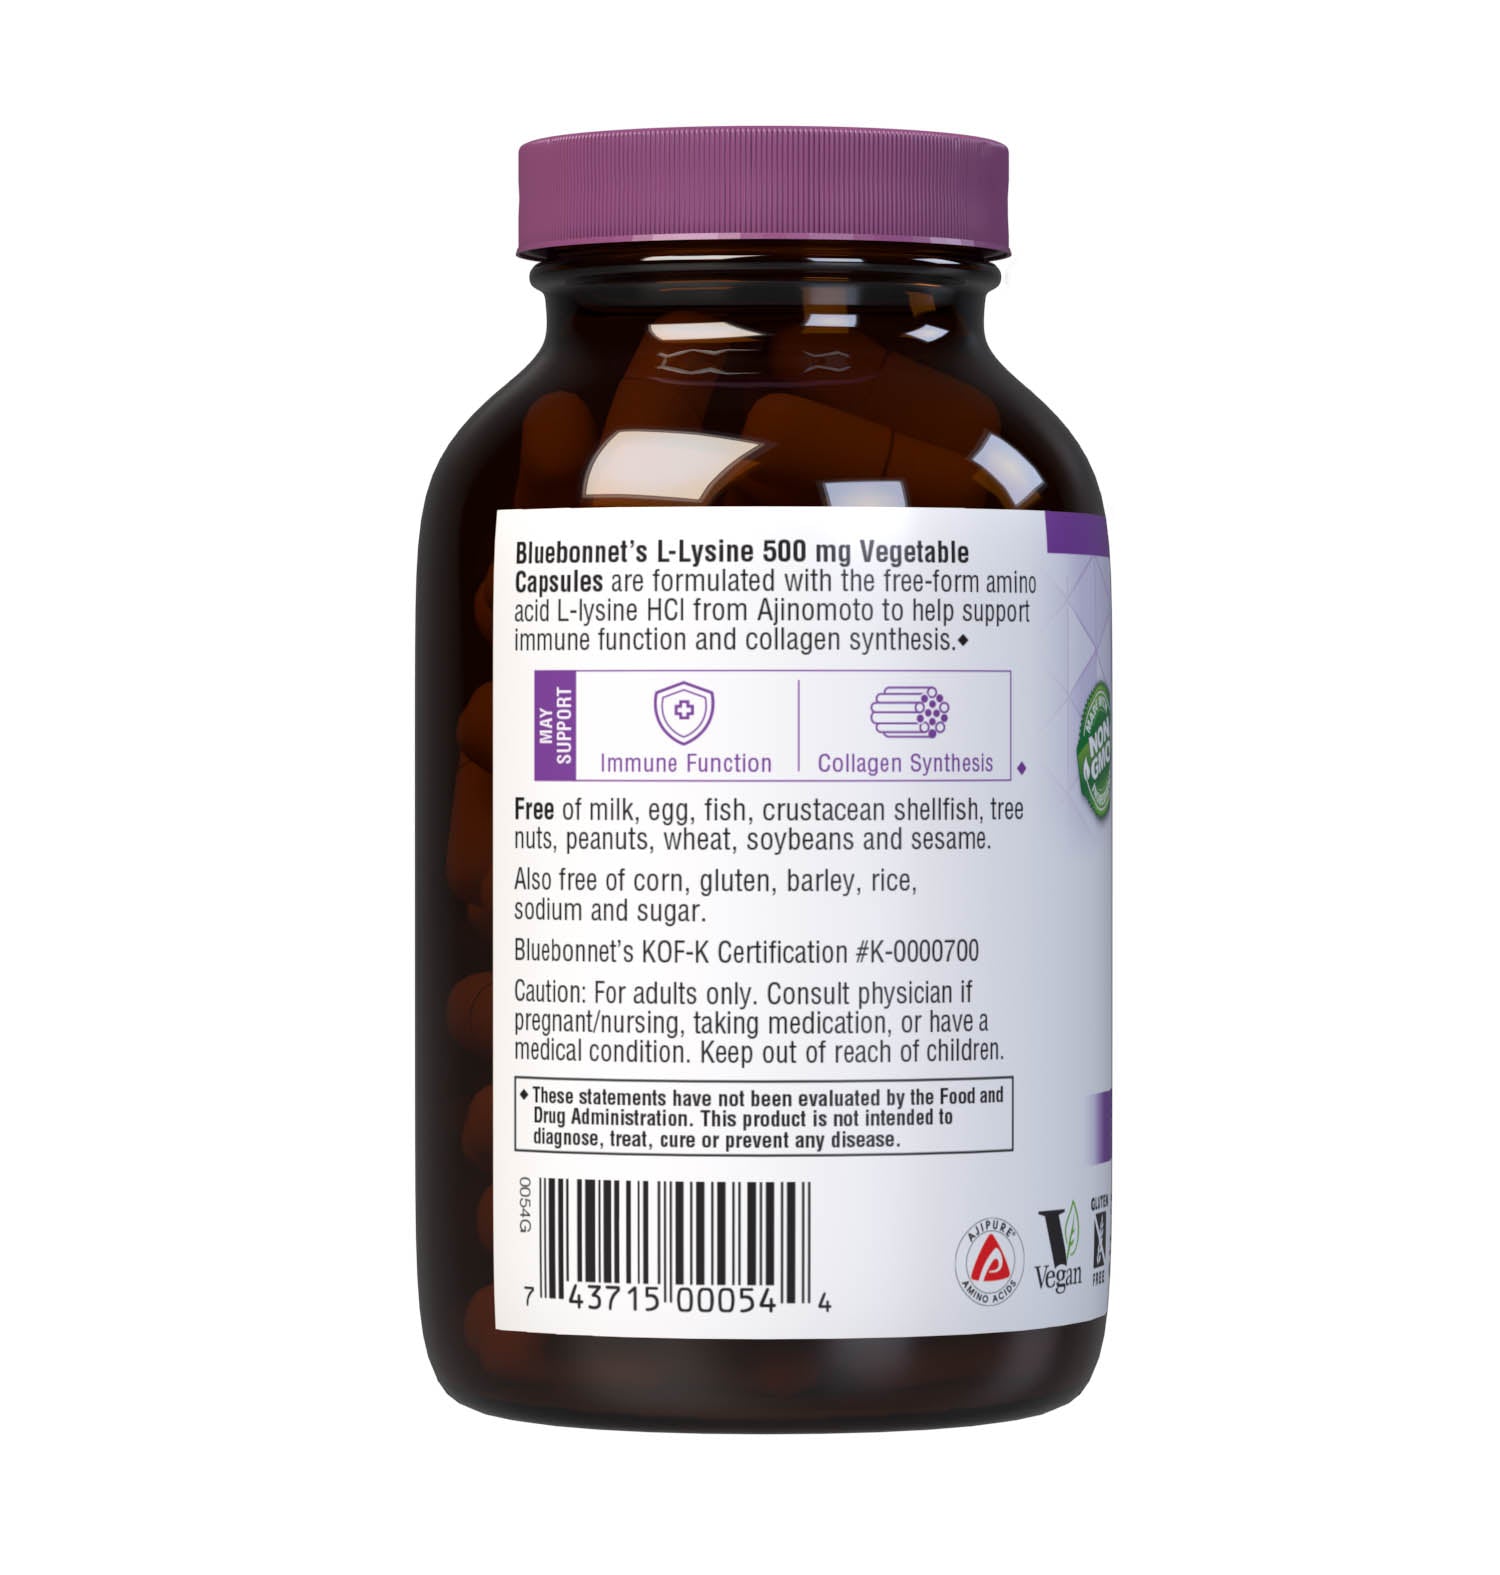 Bluebonnet’s L-Lysine 500 mg 100 vegetable capsules are formulated with the free-form amino acid L-lysine HCI in its crystalline form from Ajinomoto to help support immune function and collagen synthesis. Description panel. #size_100 count